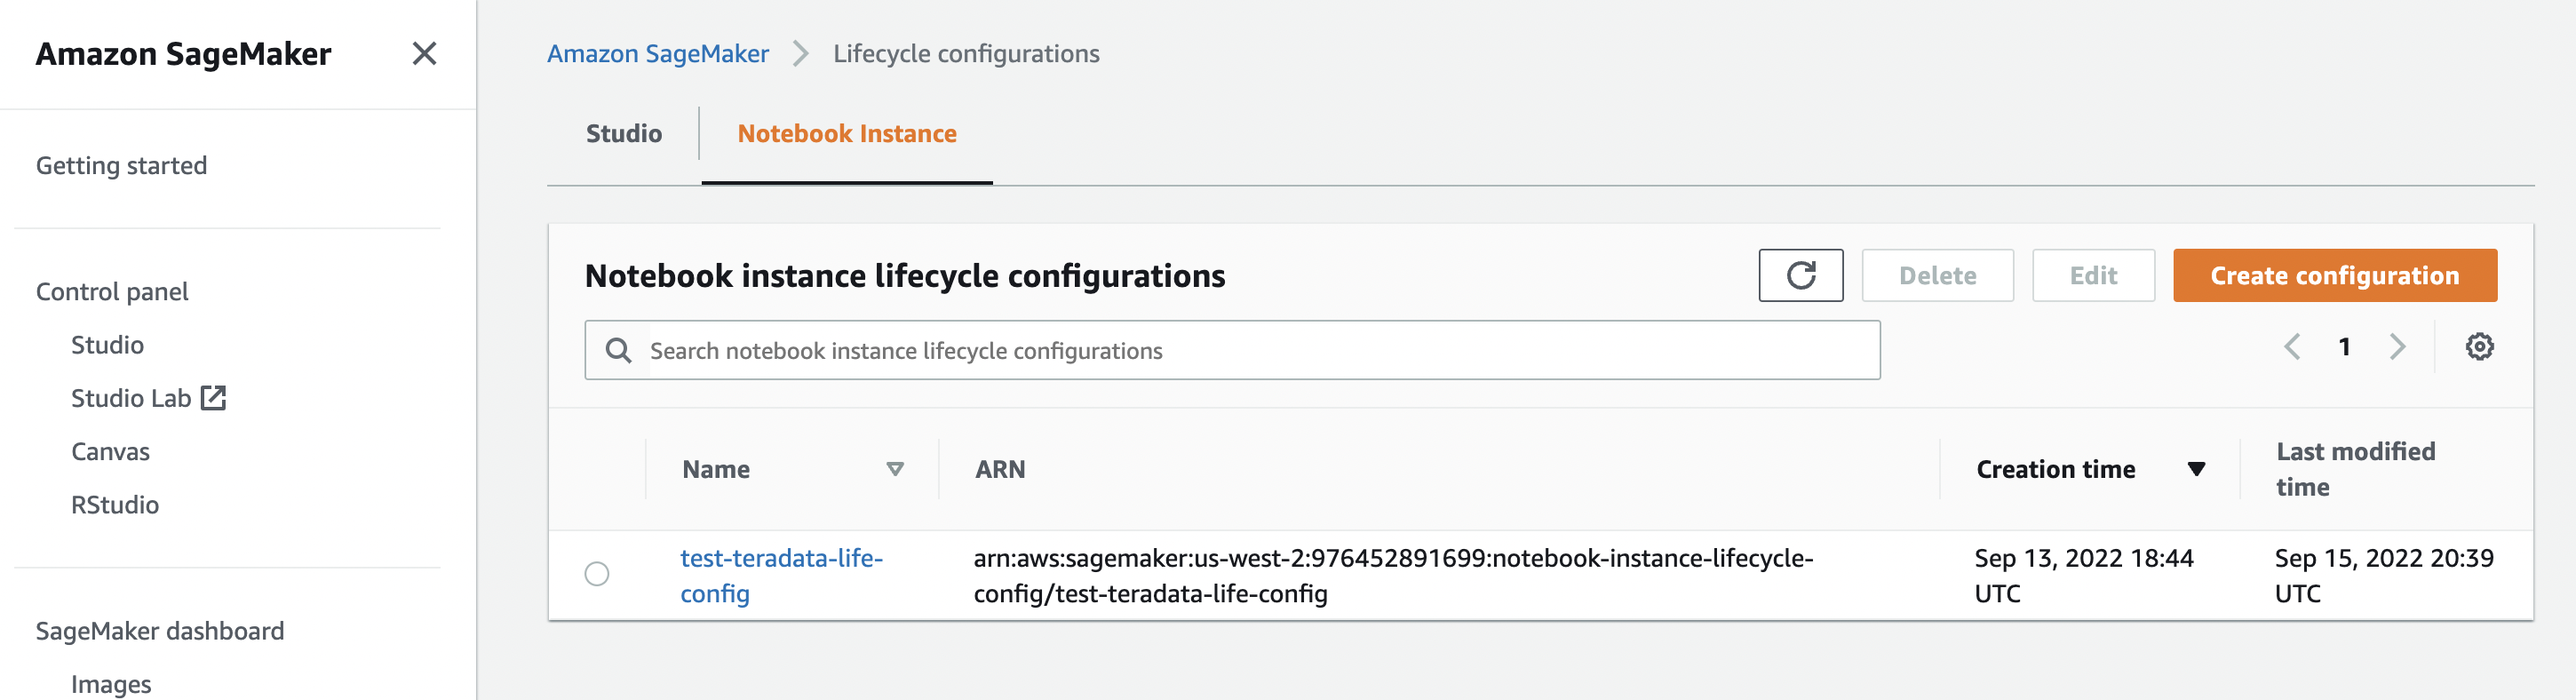 create a lifecycle configuration for notebook instance